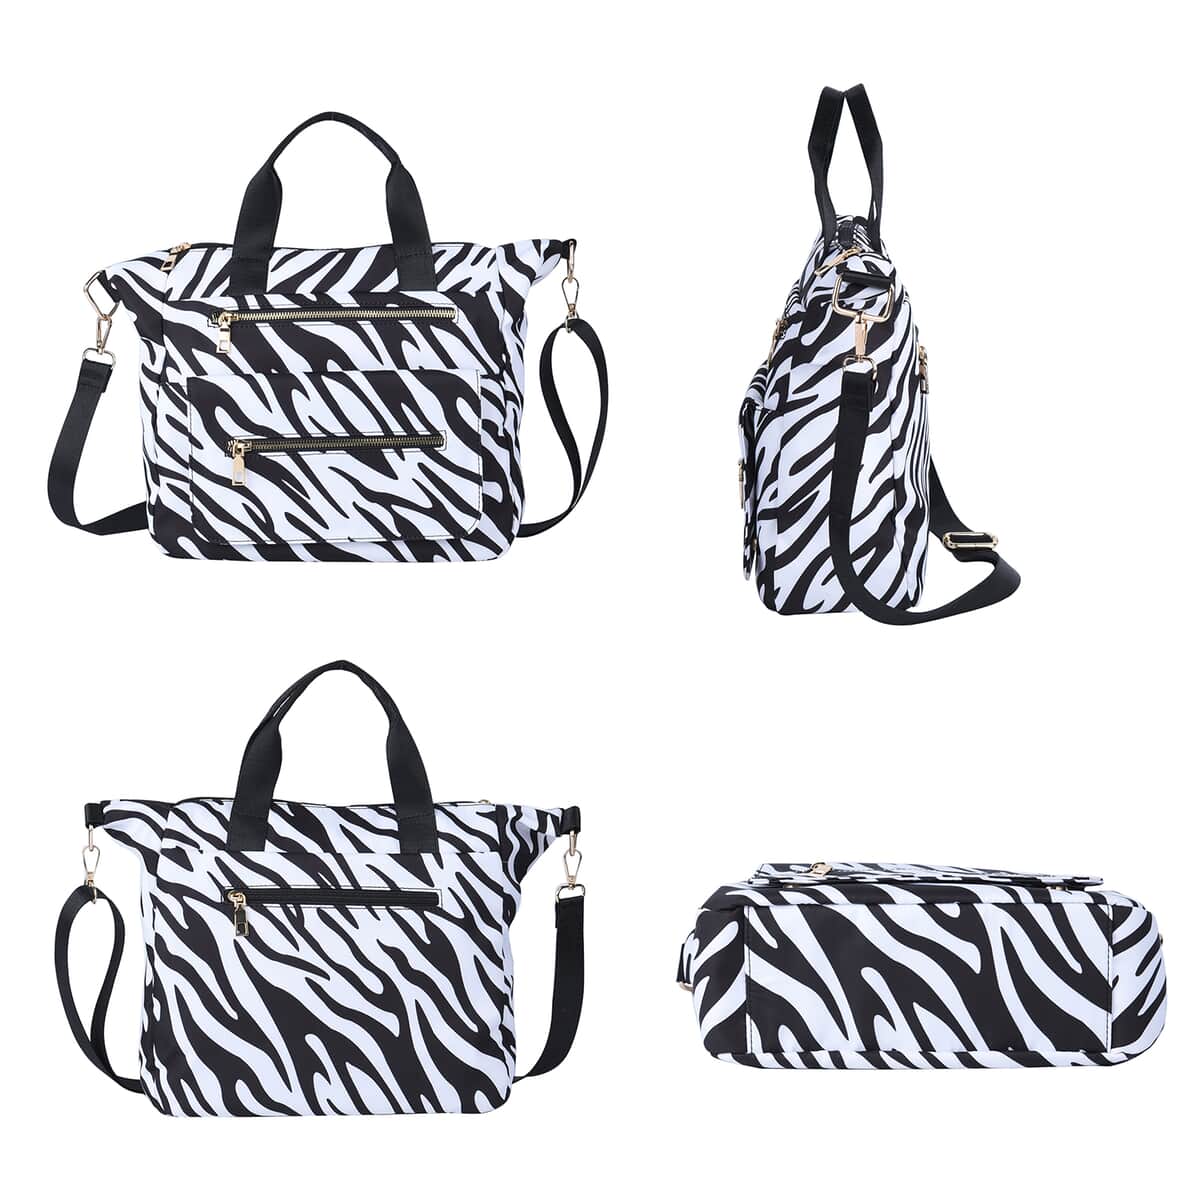 Black Color White Zebra Pattern Nylon Convertible Bag (12"x4"x11.5") with Handle and Shoulder Strap image number 3